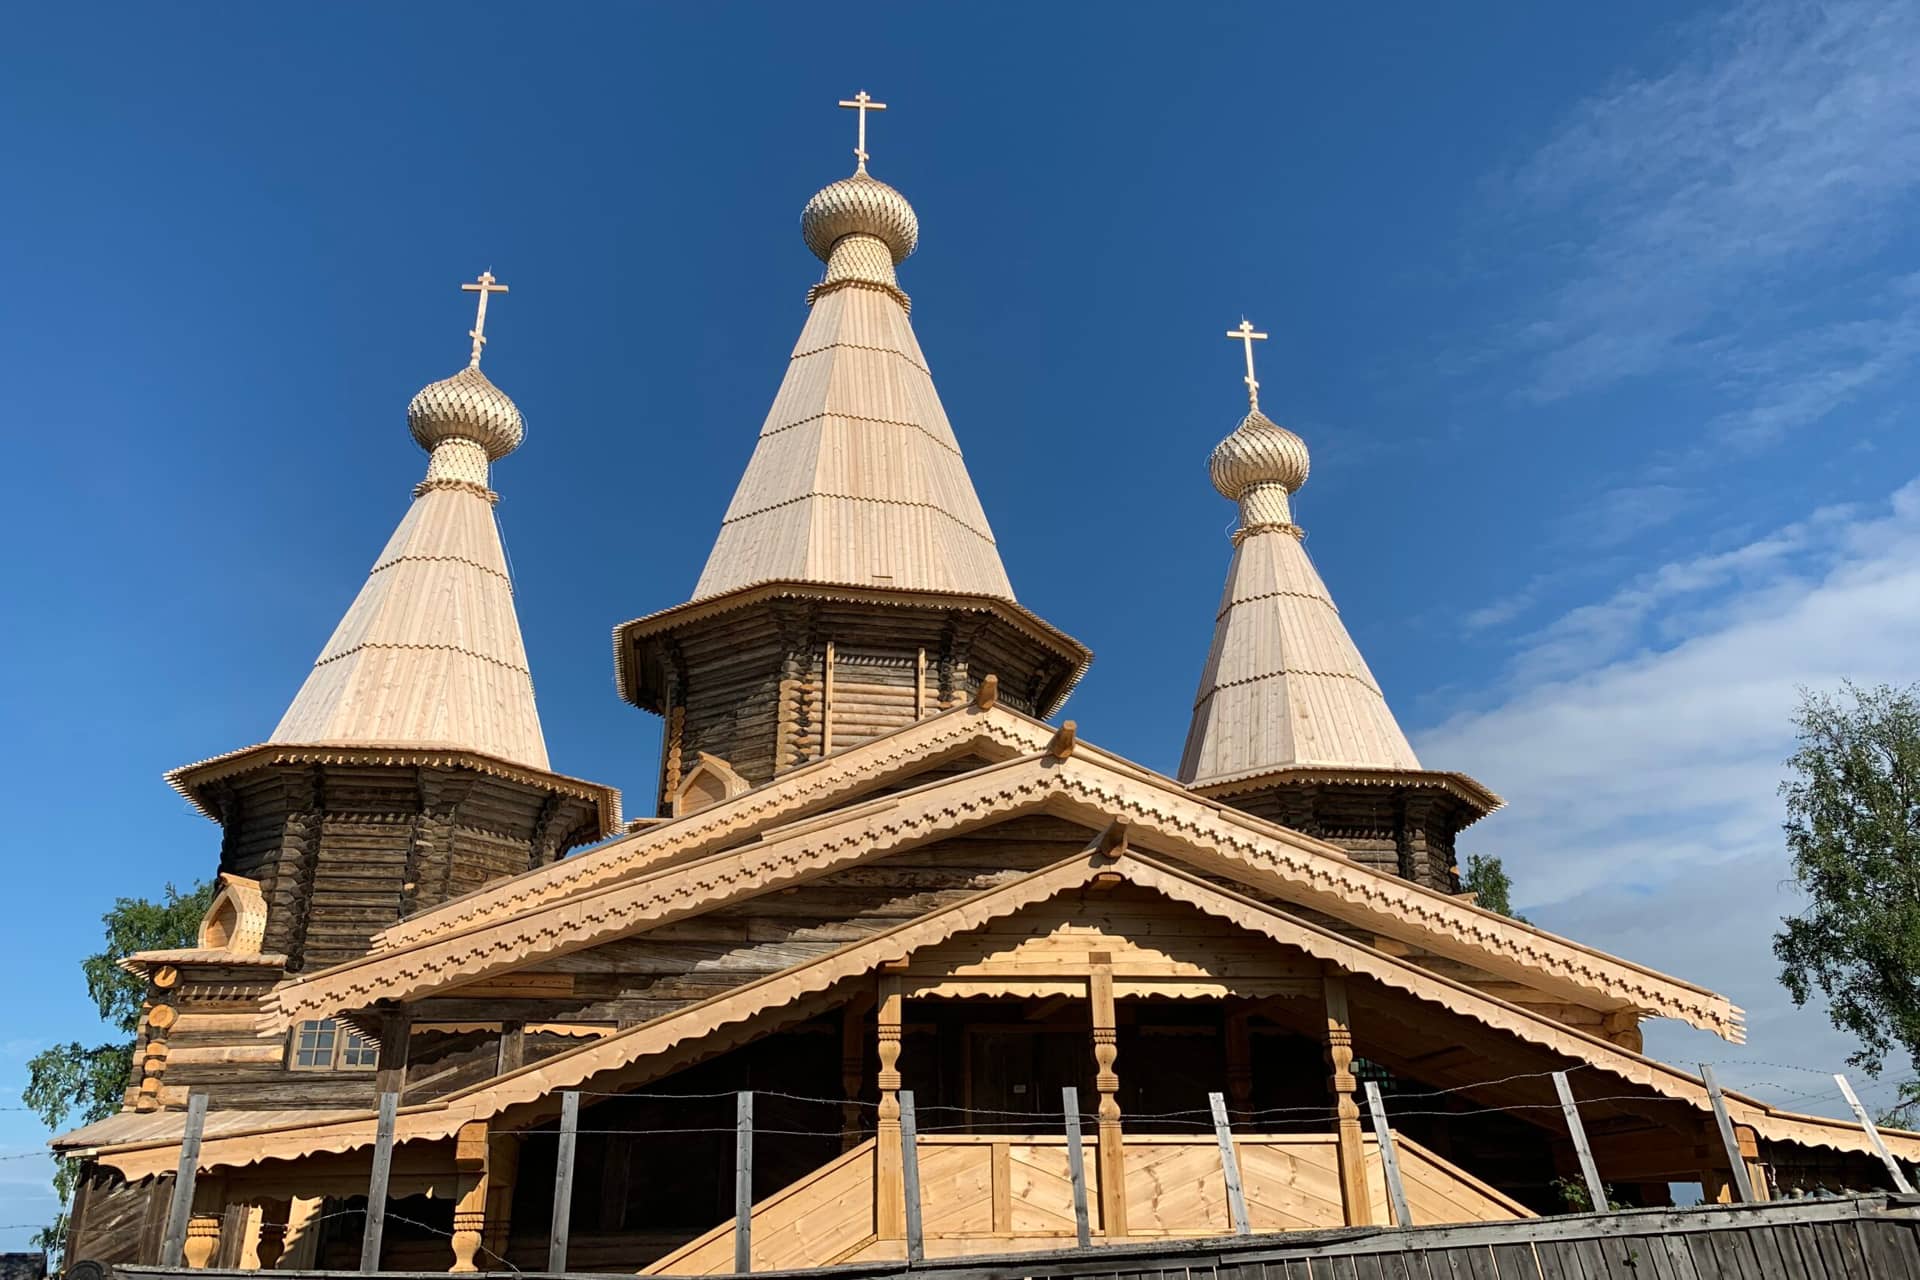 A wooden church with three towers topped with domes and crosses